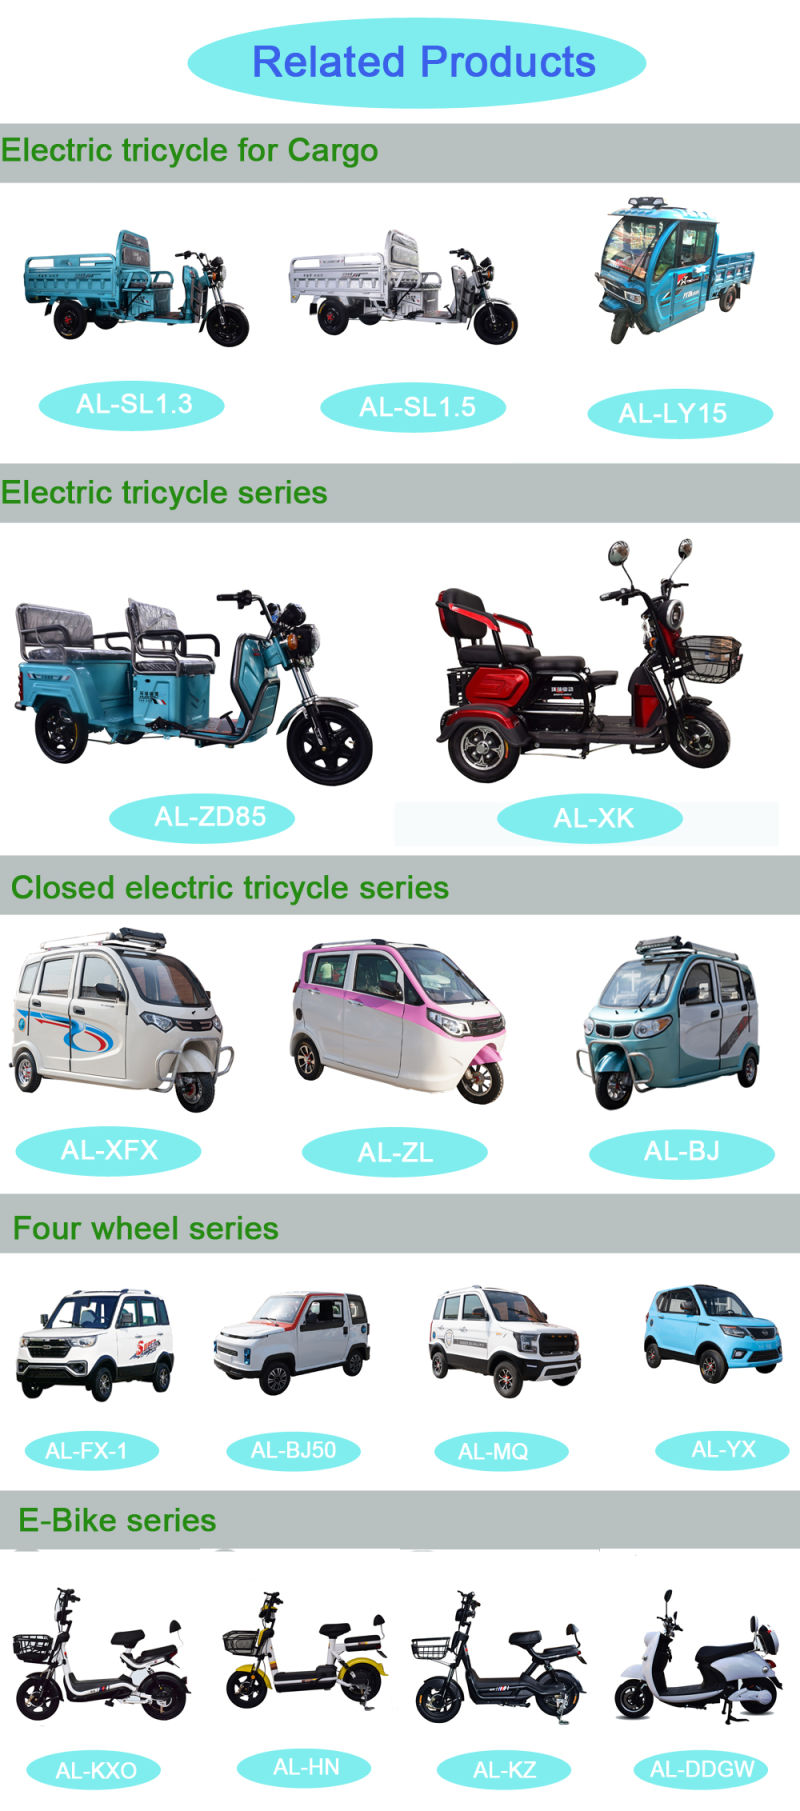 Al-Sk Cheap Electric Cars for Sale Prices of Electric Cars